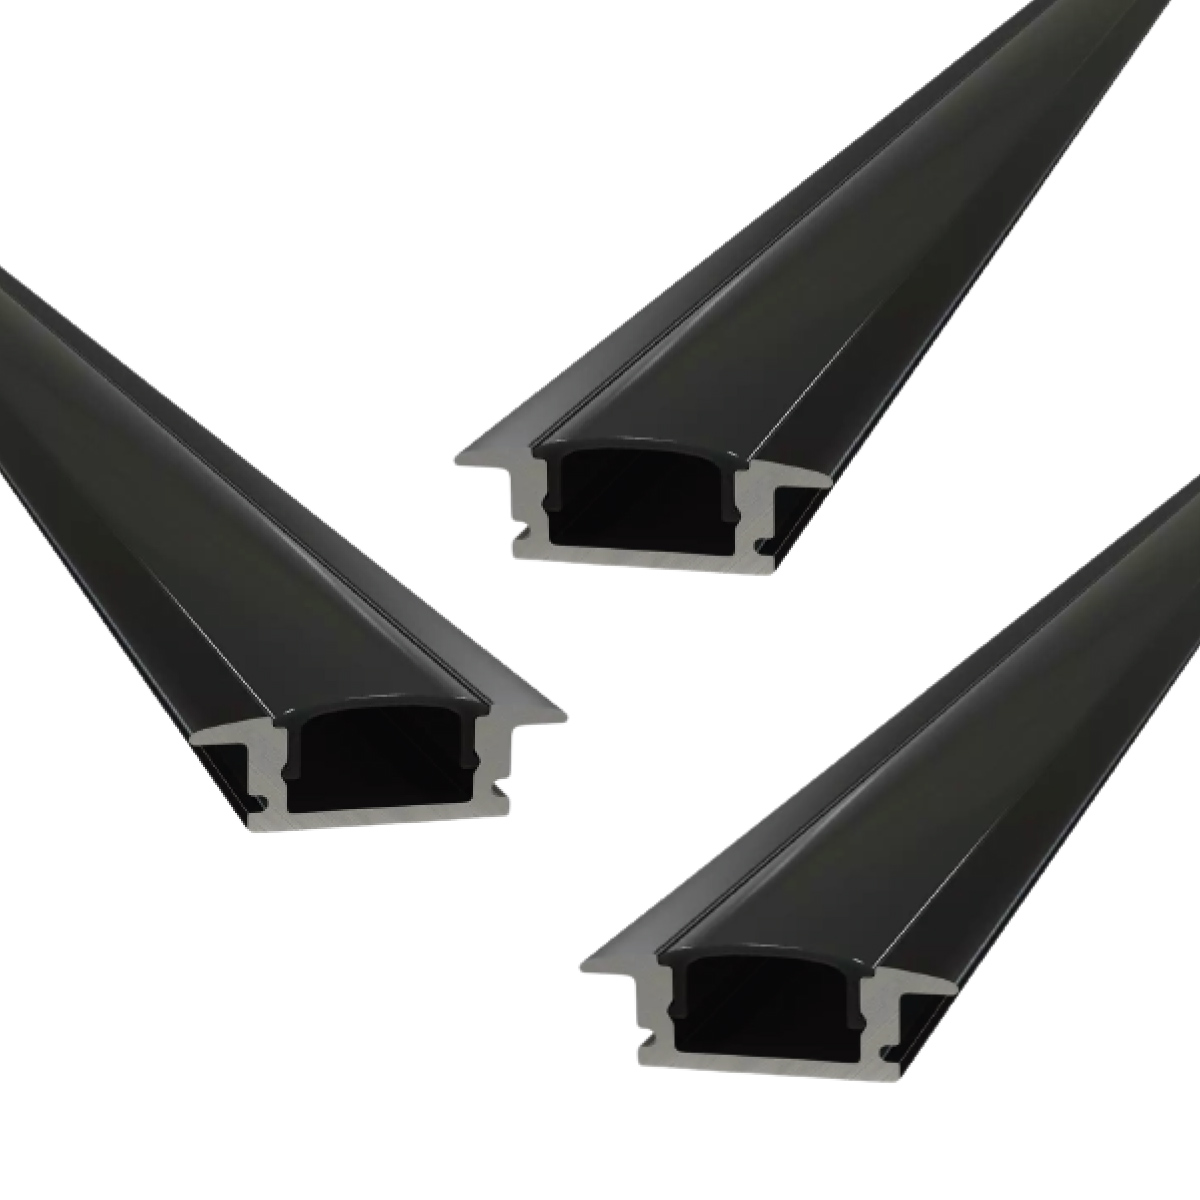 View Pack of 3 Black Aluminium Profiles Recessed With Cover and End Caps 2M information